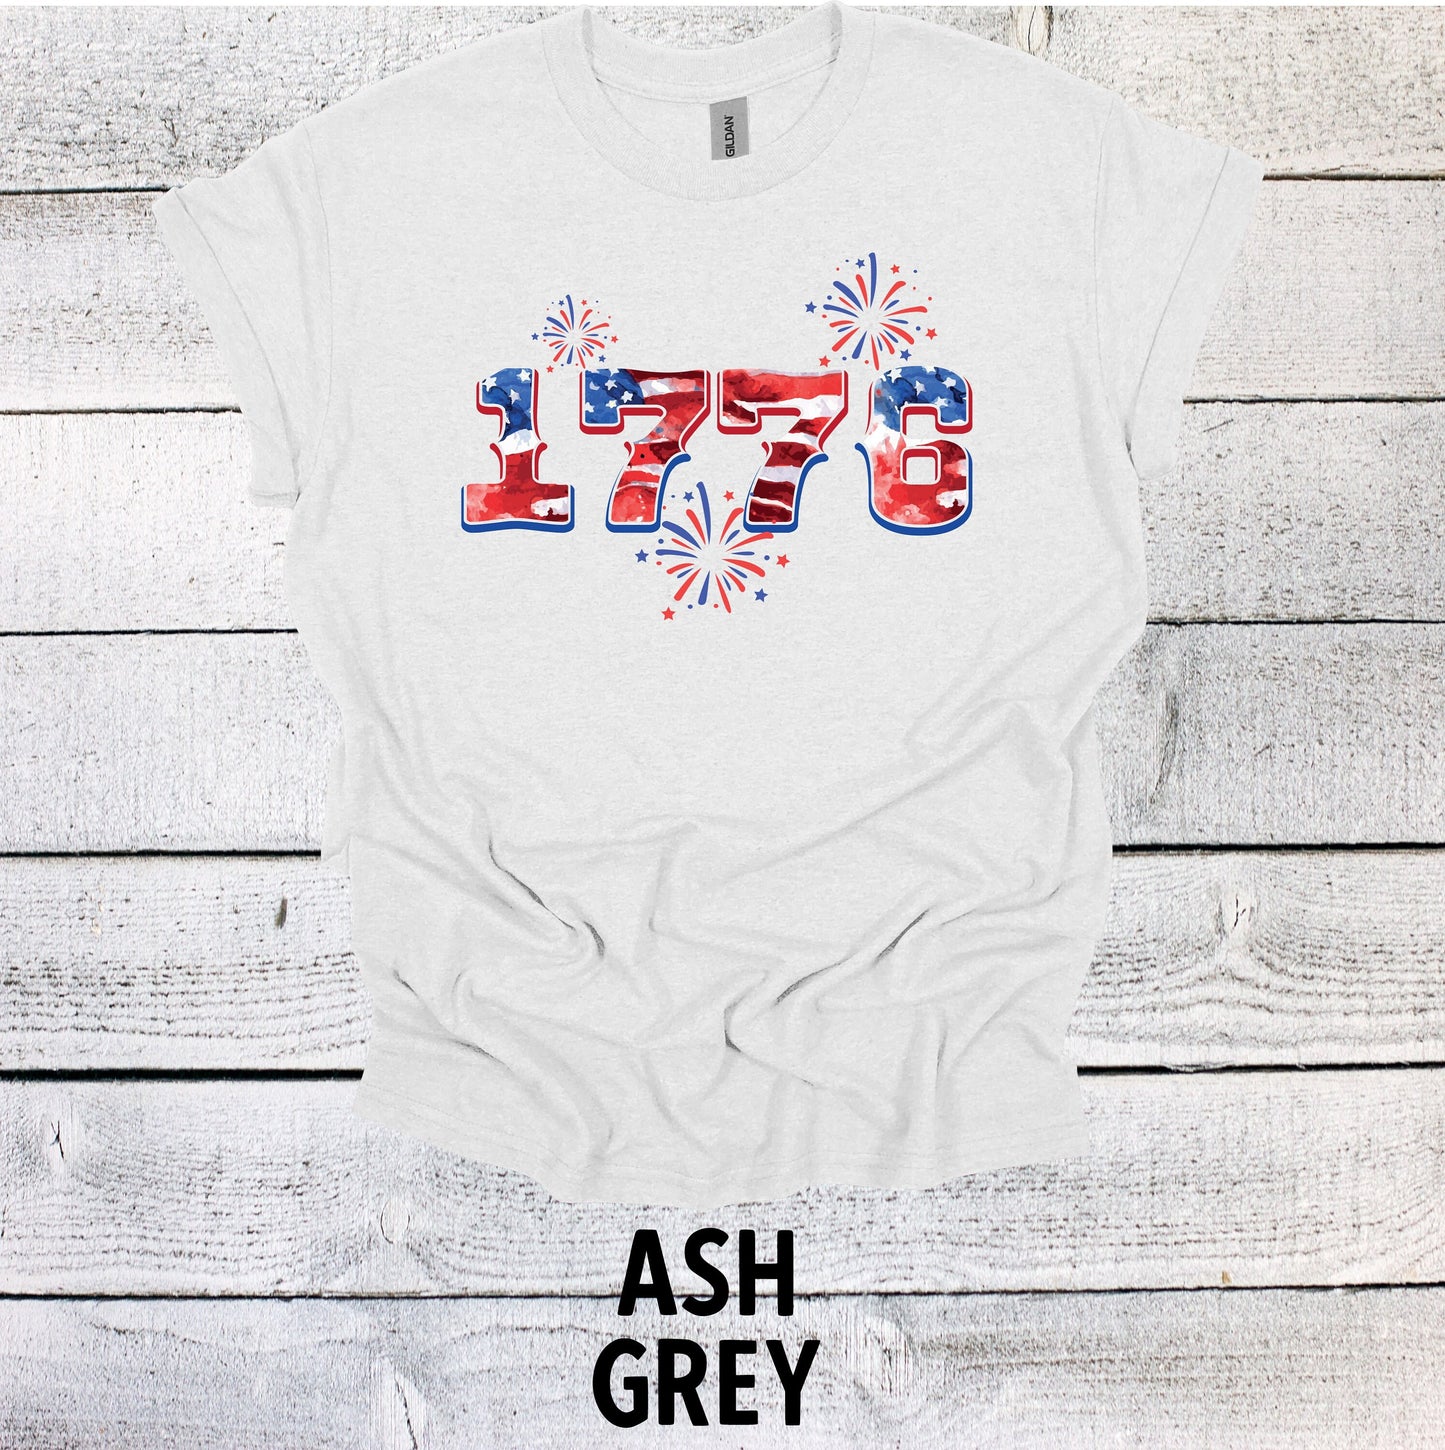 1776 Red, White, and Blue July 4th Shirt - Celebrate Independence Day in Style